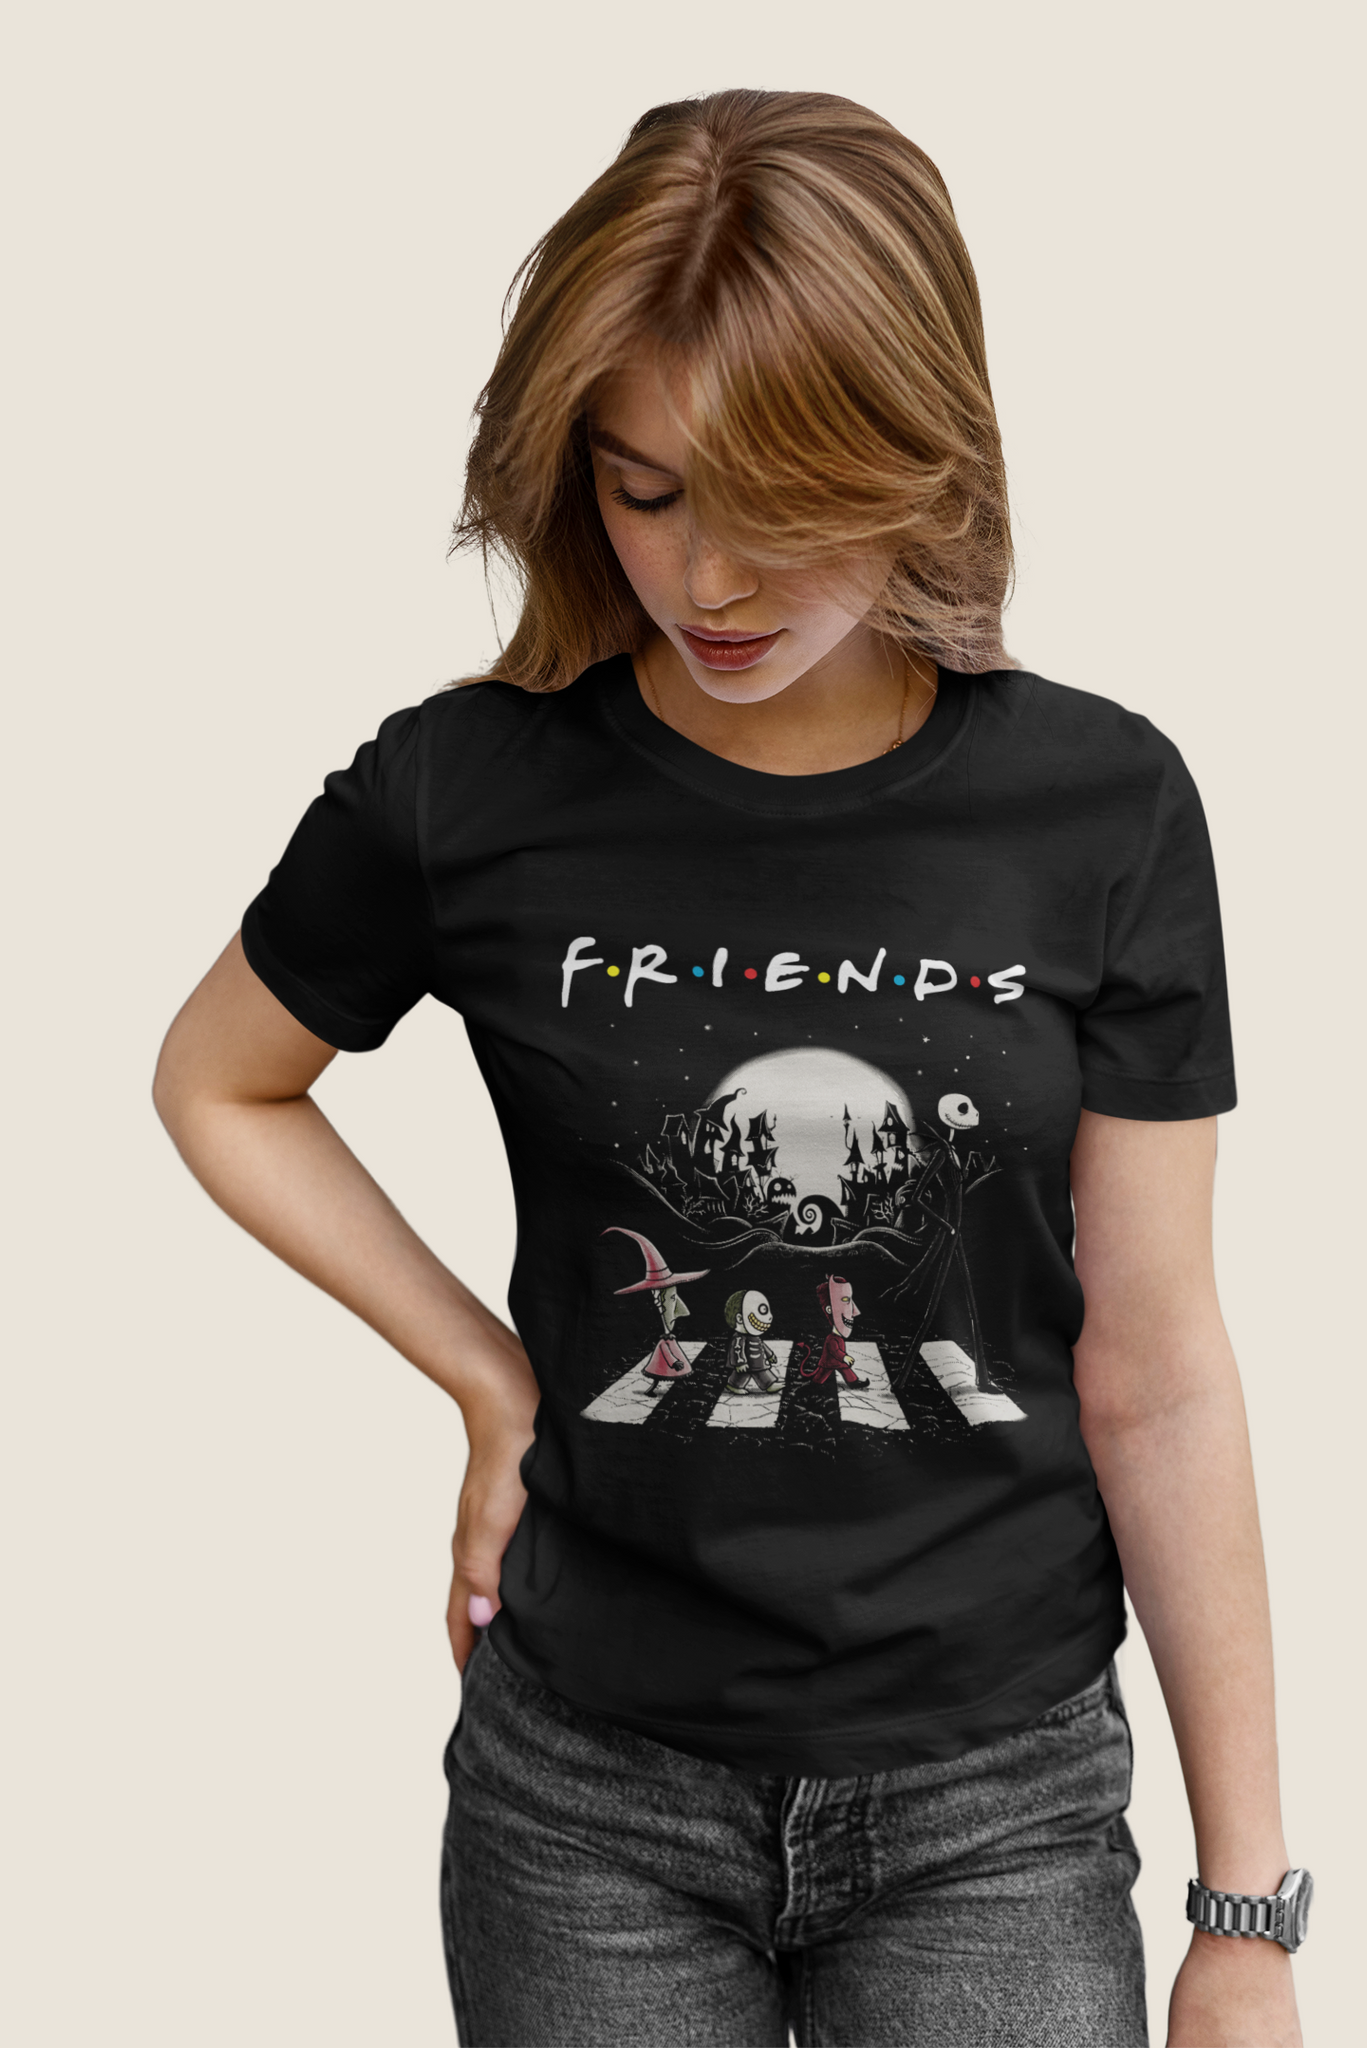 Nightmare Before Christmas T Shirt, Jack Skellington And Friends Abbey Road Tshirt, Horror Character T Shirt, Halloween Gifts